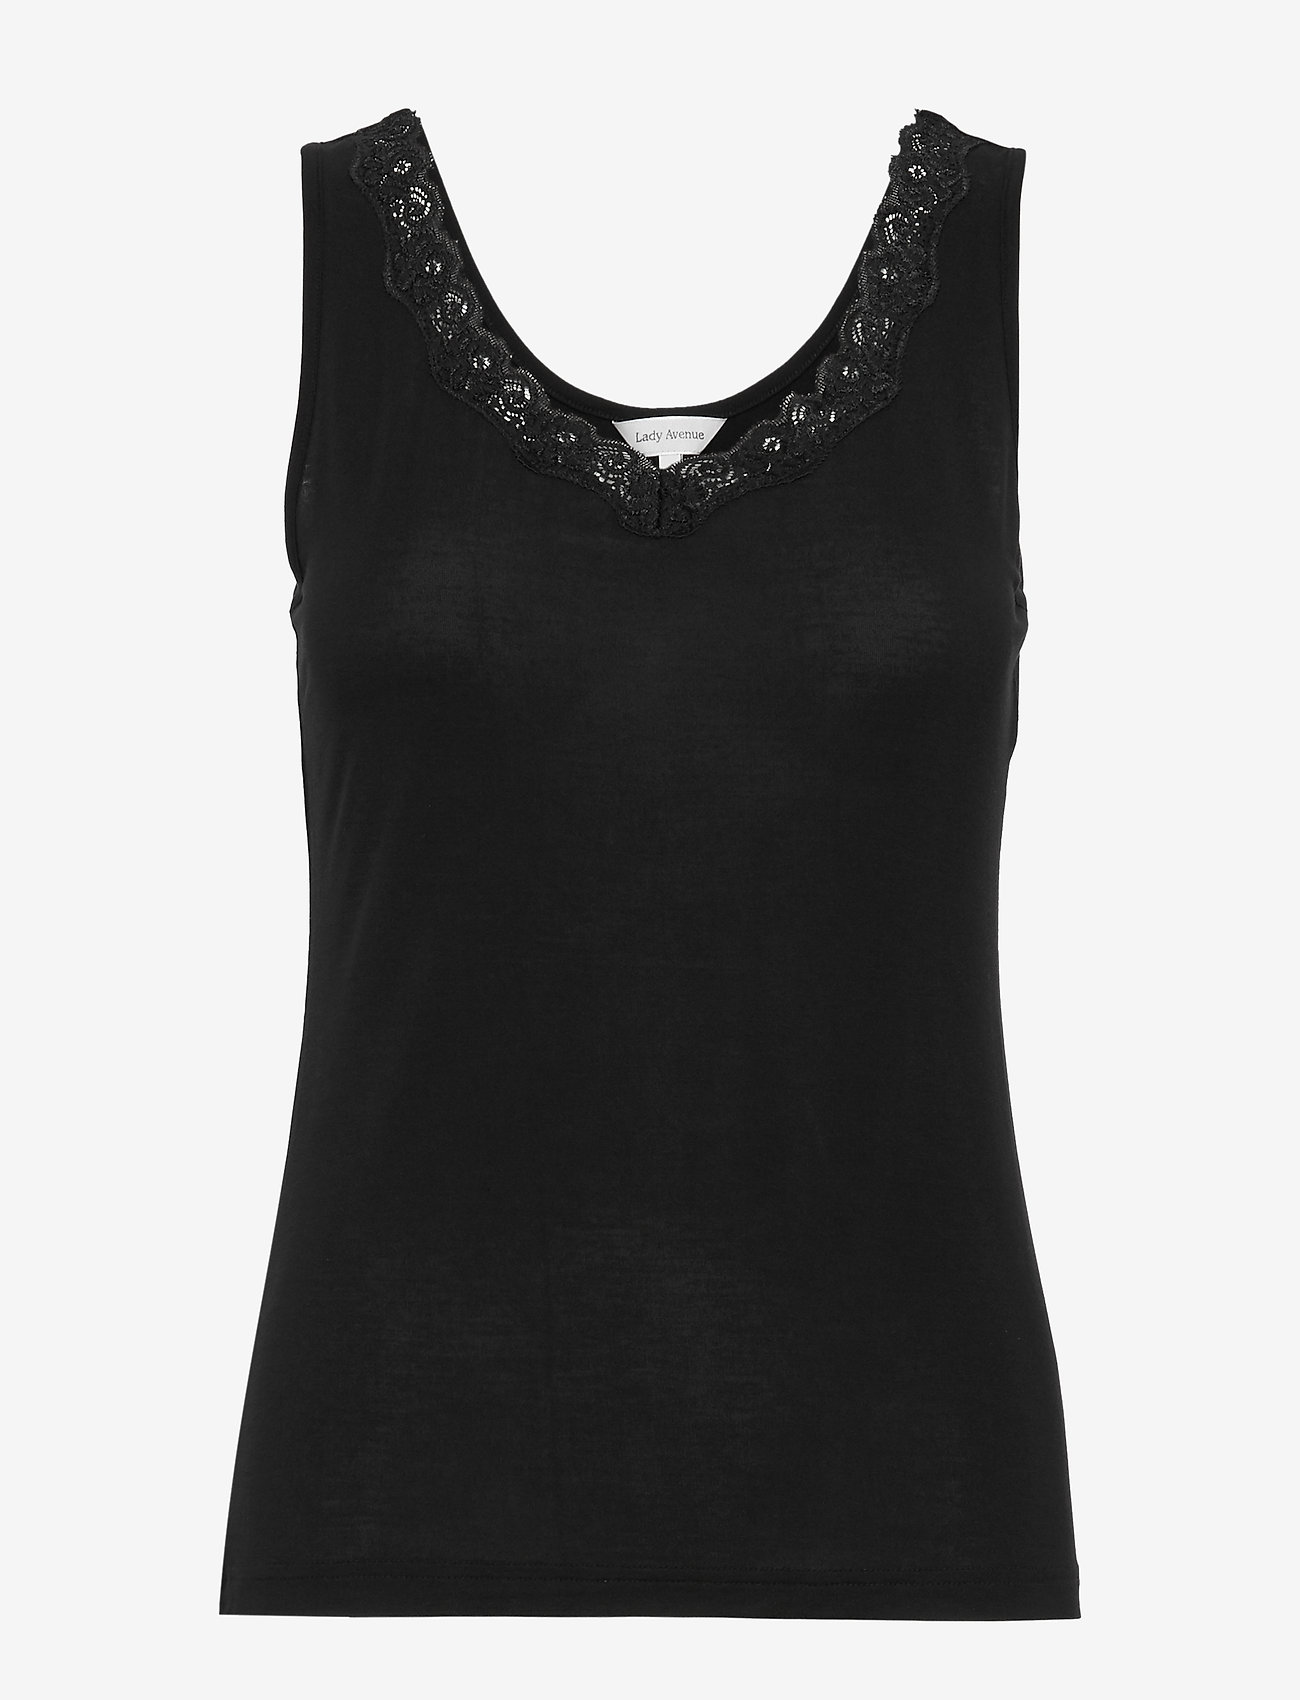 Lady Avenue - Bamboo - Tank top with lace - pysjoverdeler - black - 1